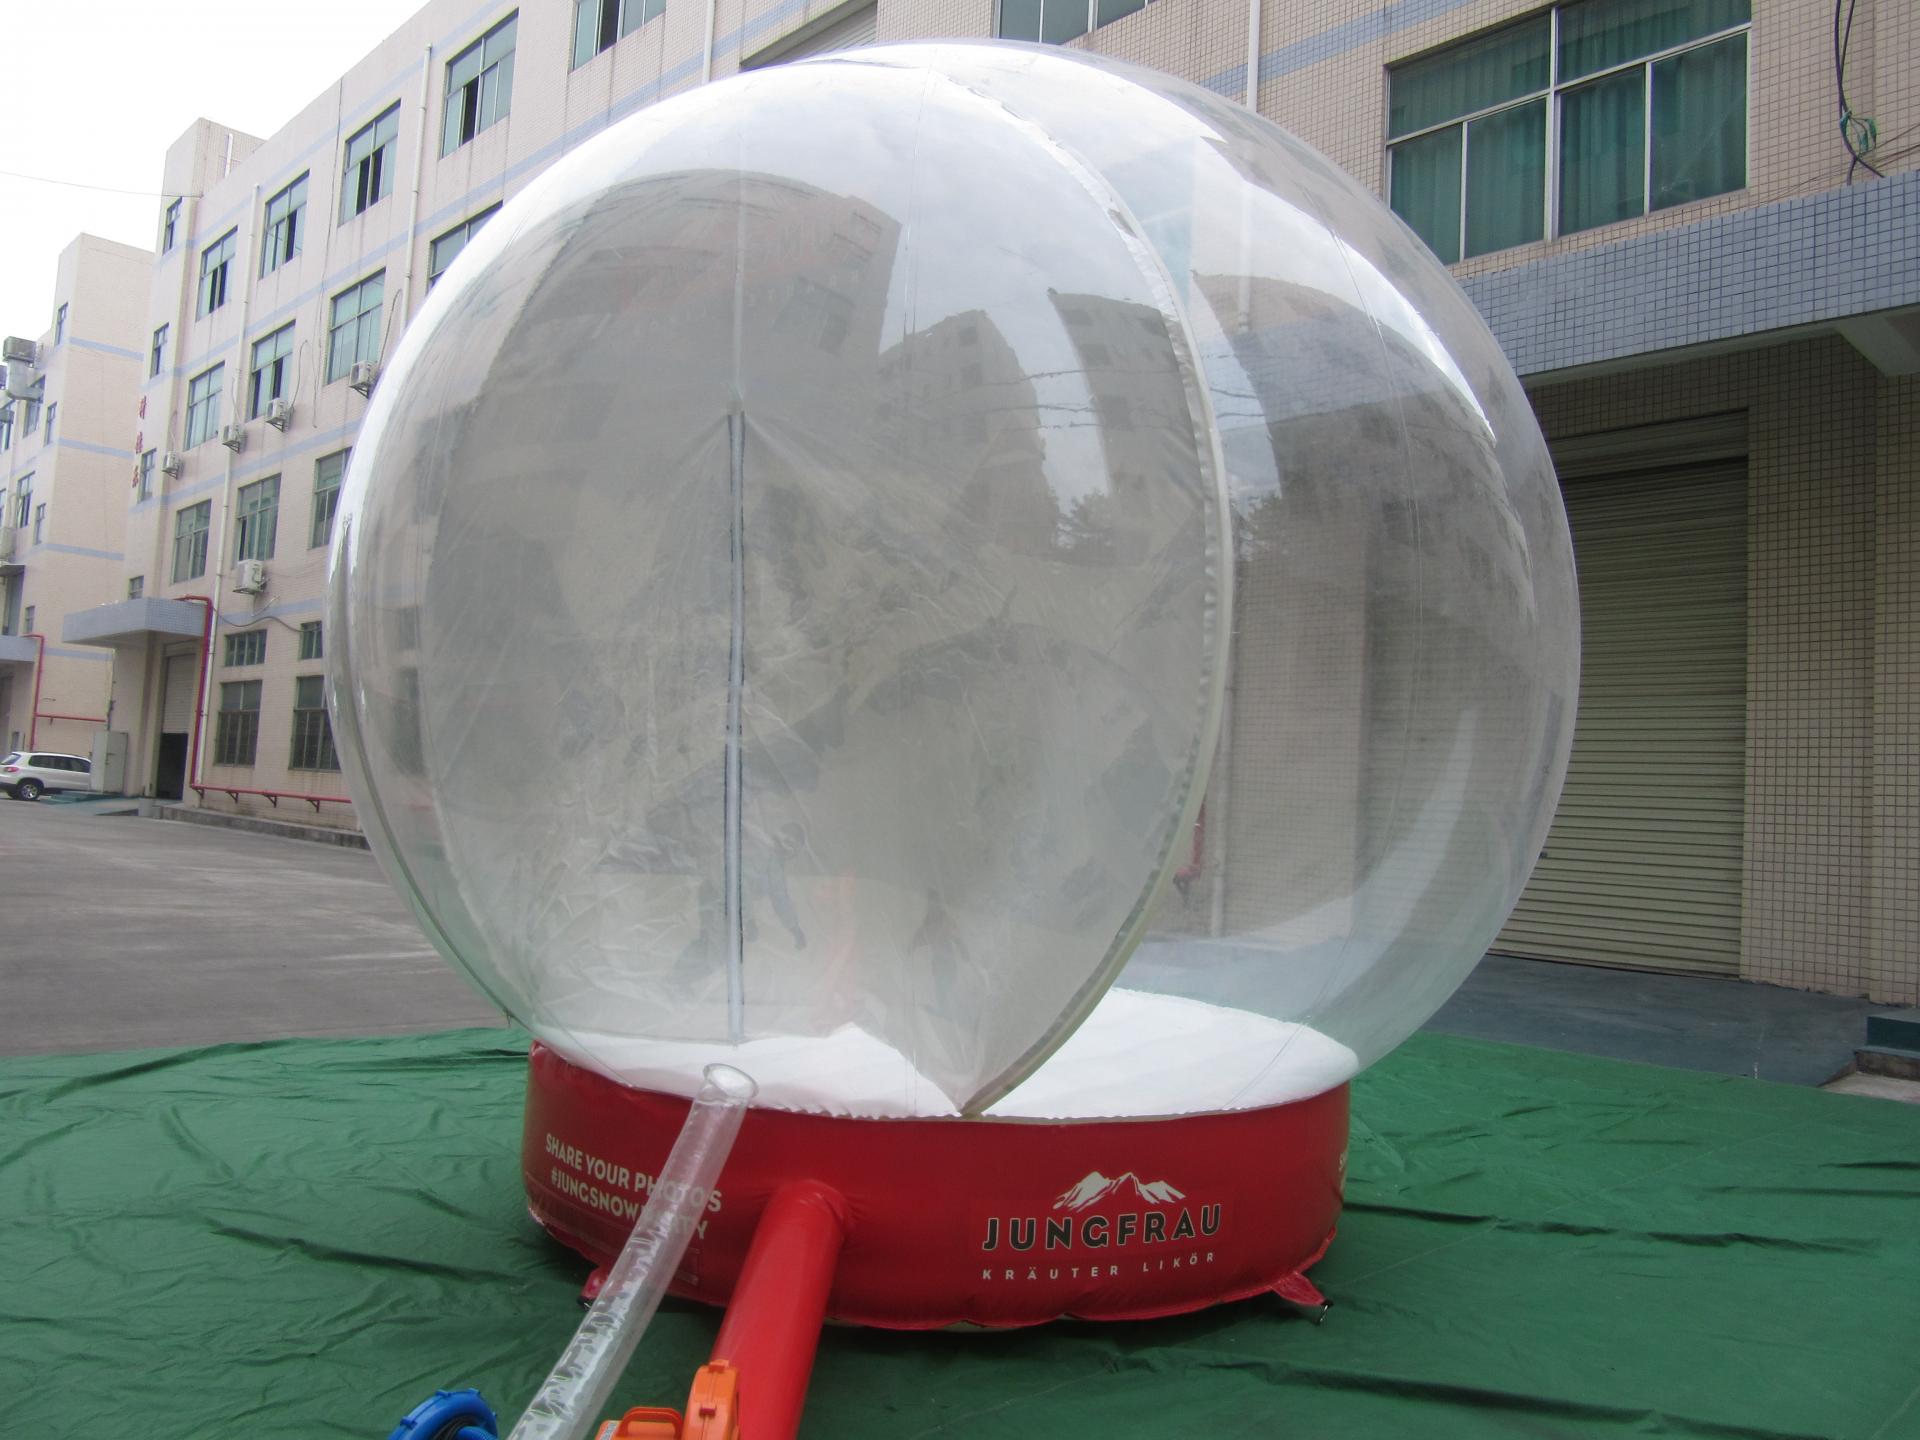 Customised Inflatable Ground Dome Ball Christmas Yard Decorations Ornaments Lighting Up